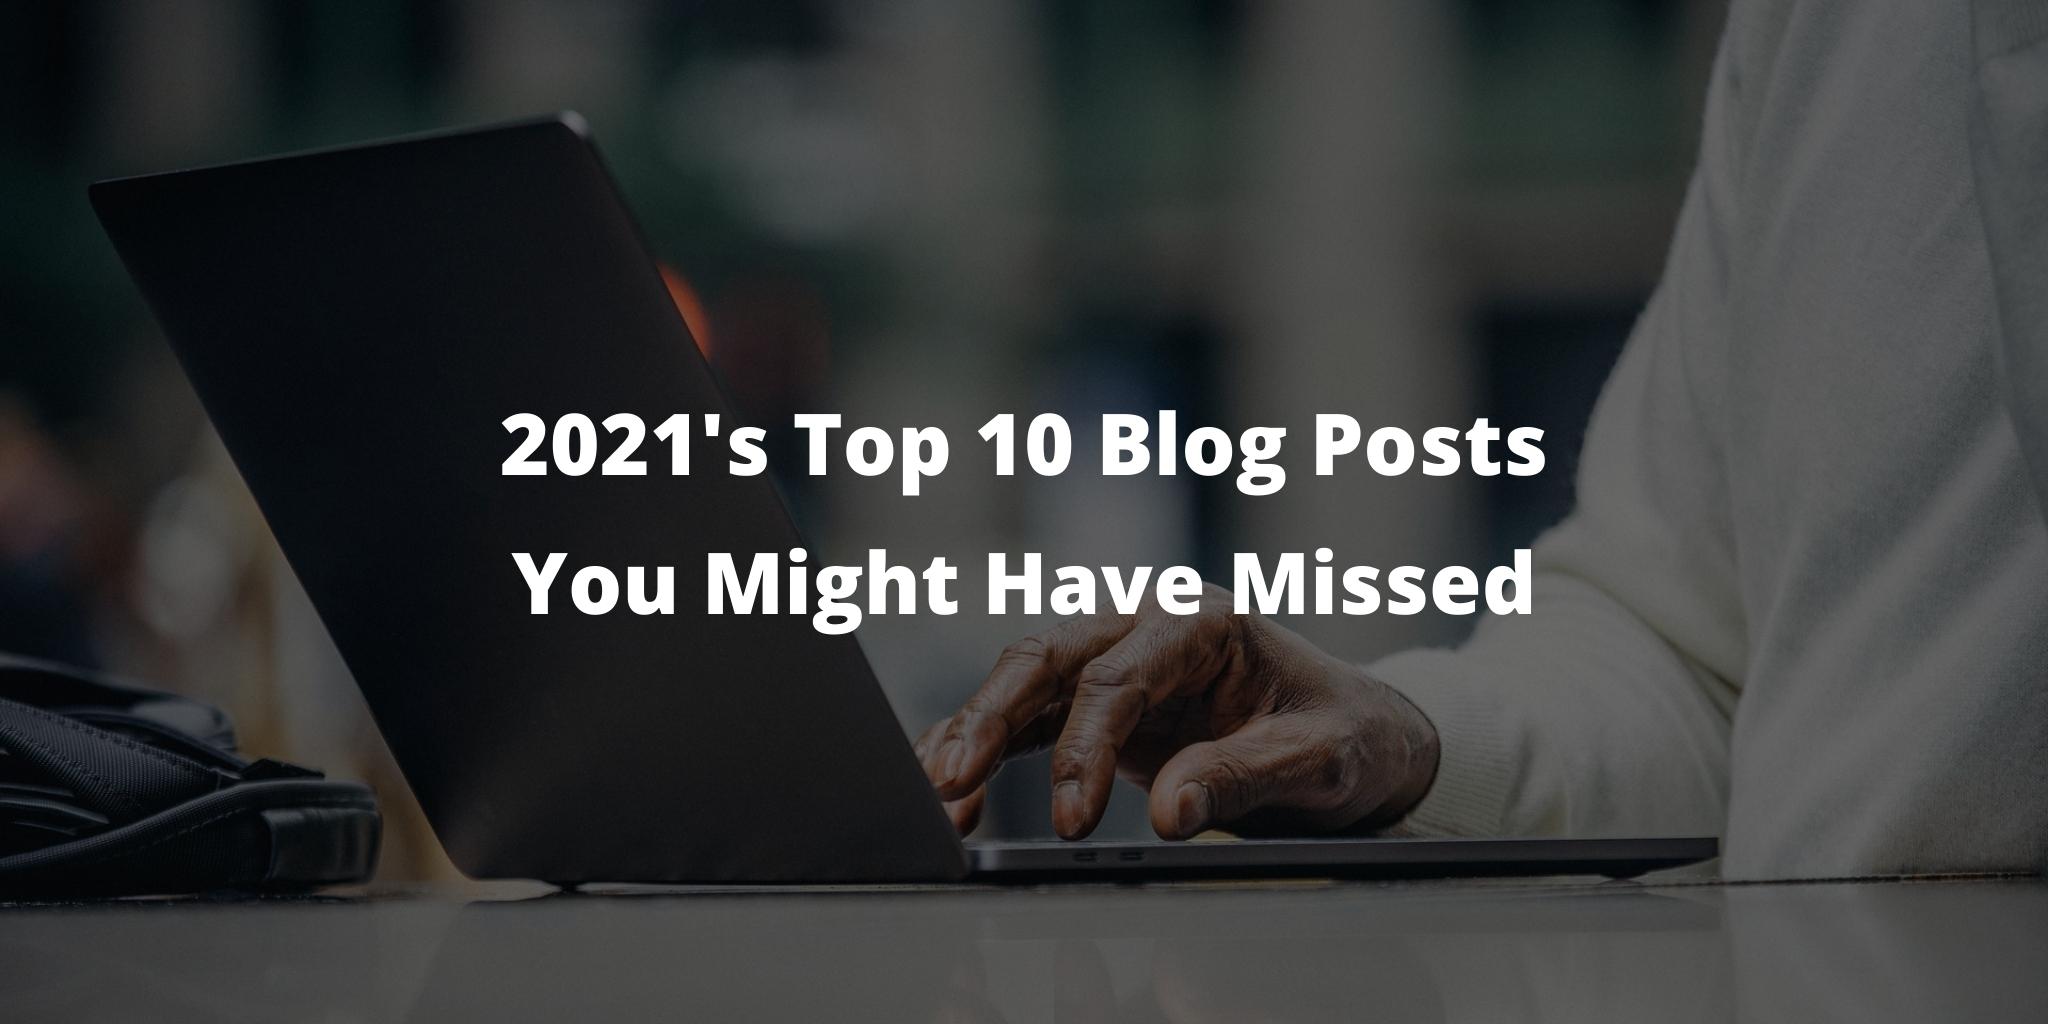 2021's Top 10 Blog Posts You Might Have Missed